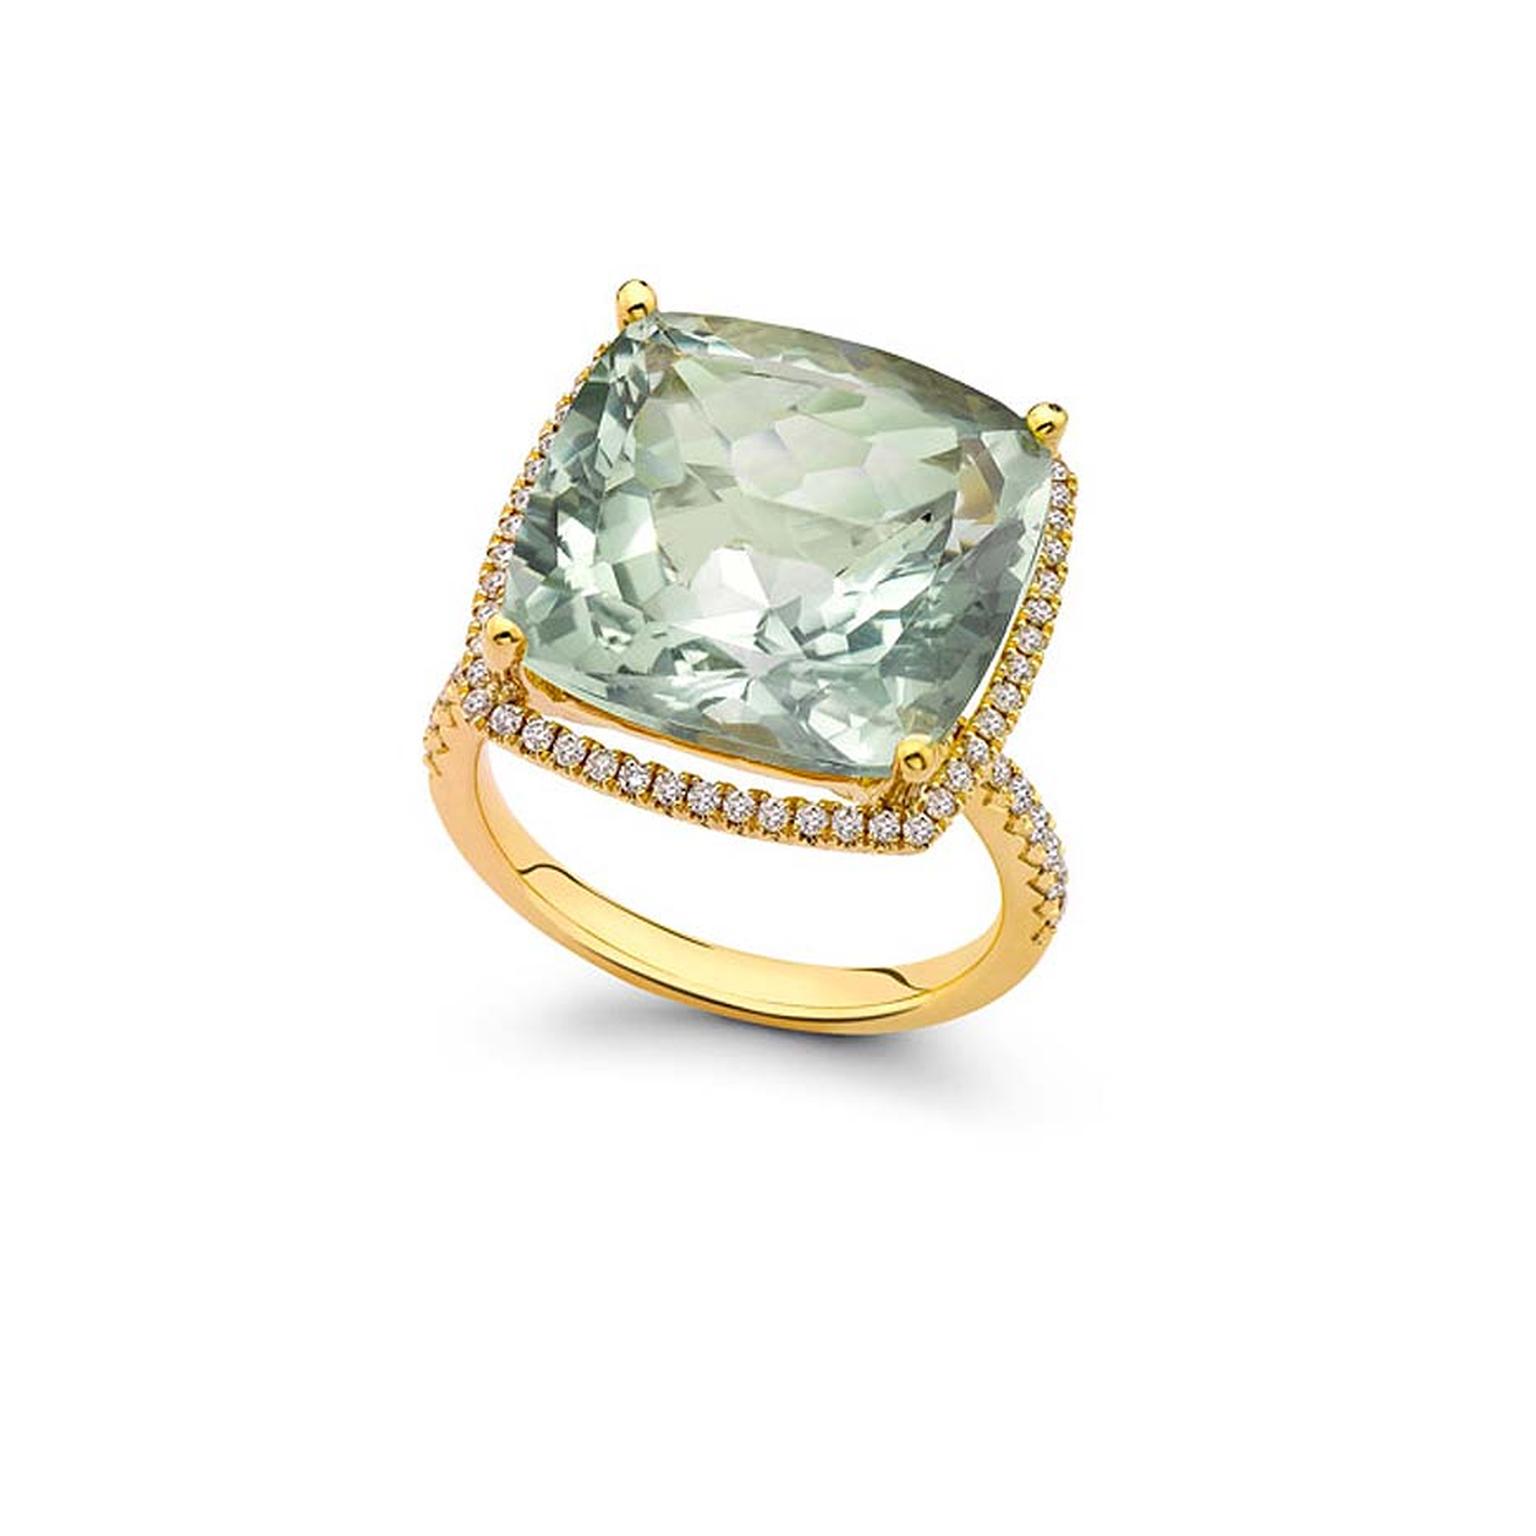 Kiki McDonough Grace green amethyst cushion ring in yellow gold features a cushion-cut pale green amethyst  surrounded by pavé-set diamonds. £2900.